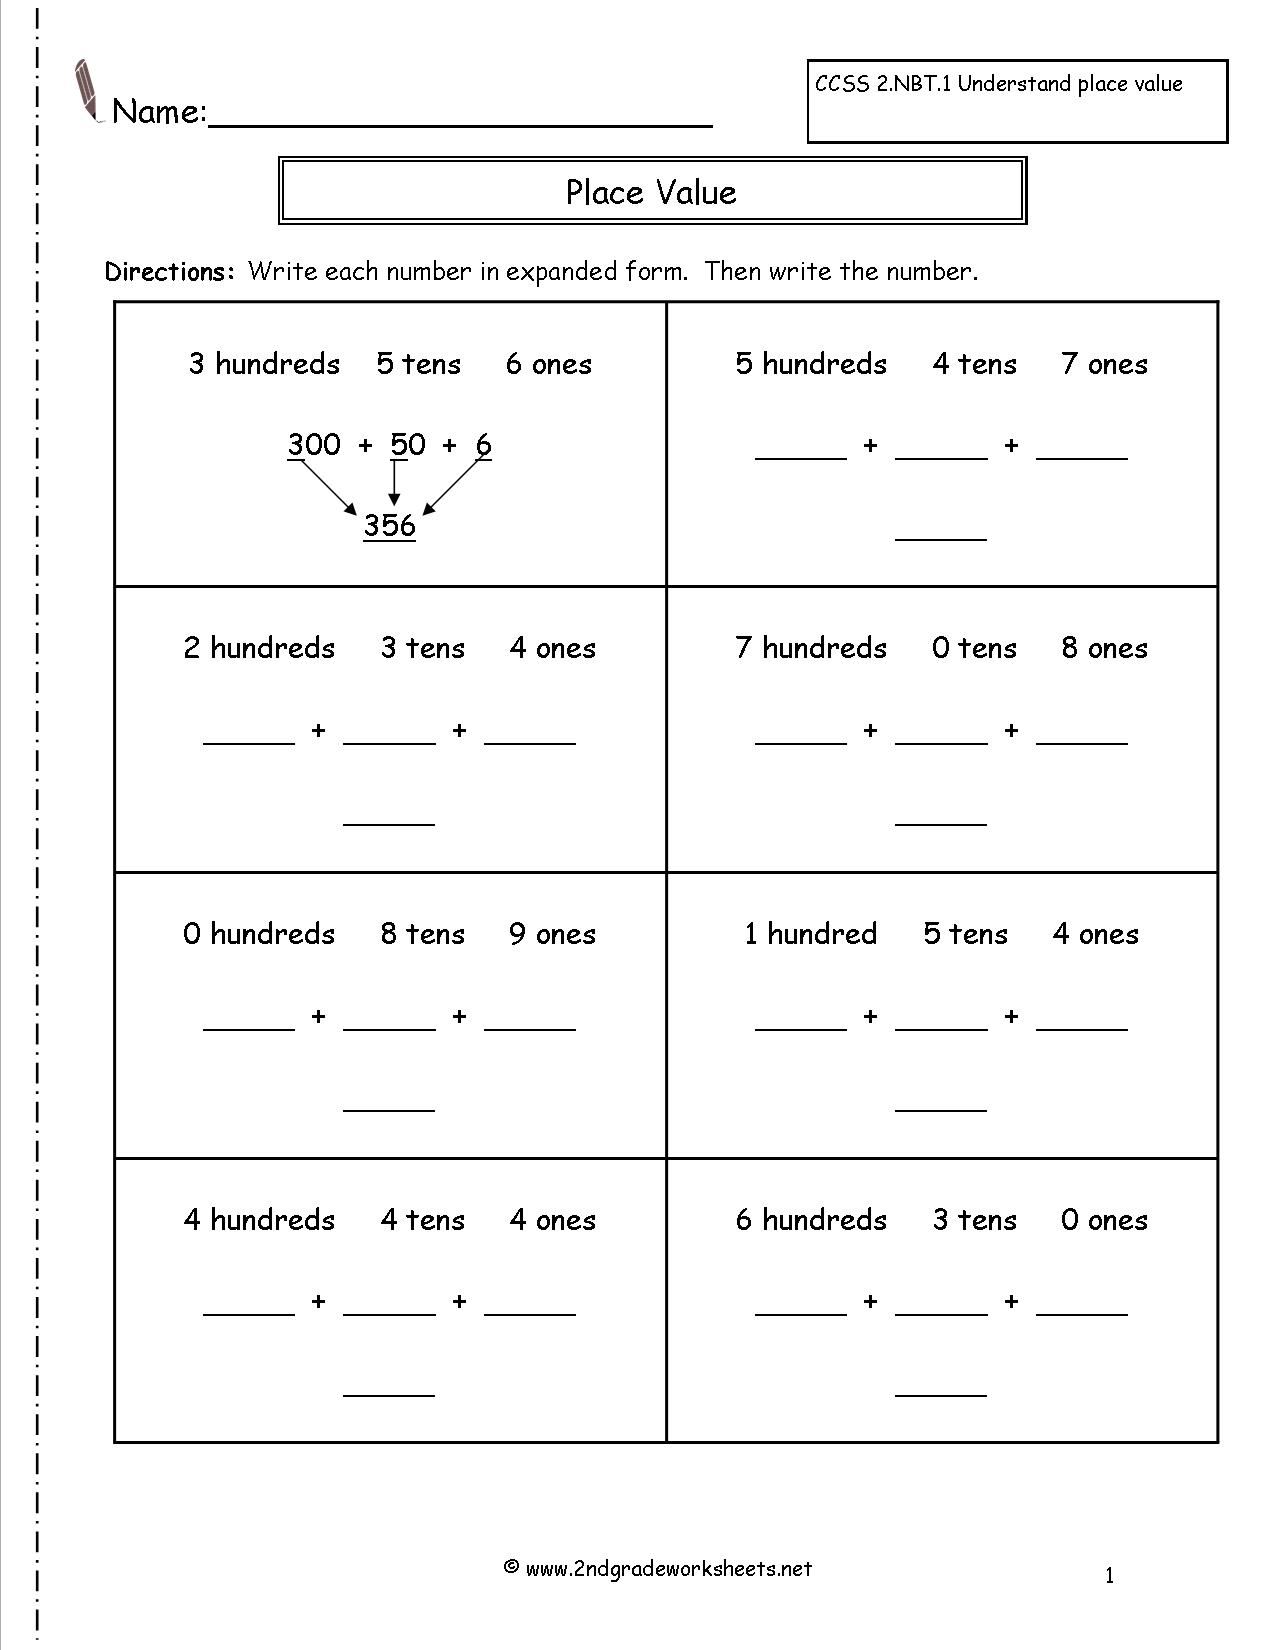 Write Numbers in Expanded Form Worksheets 2nd Grade Image